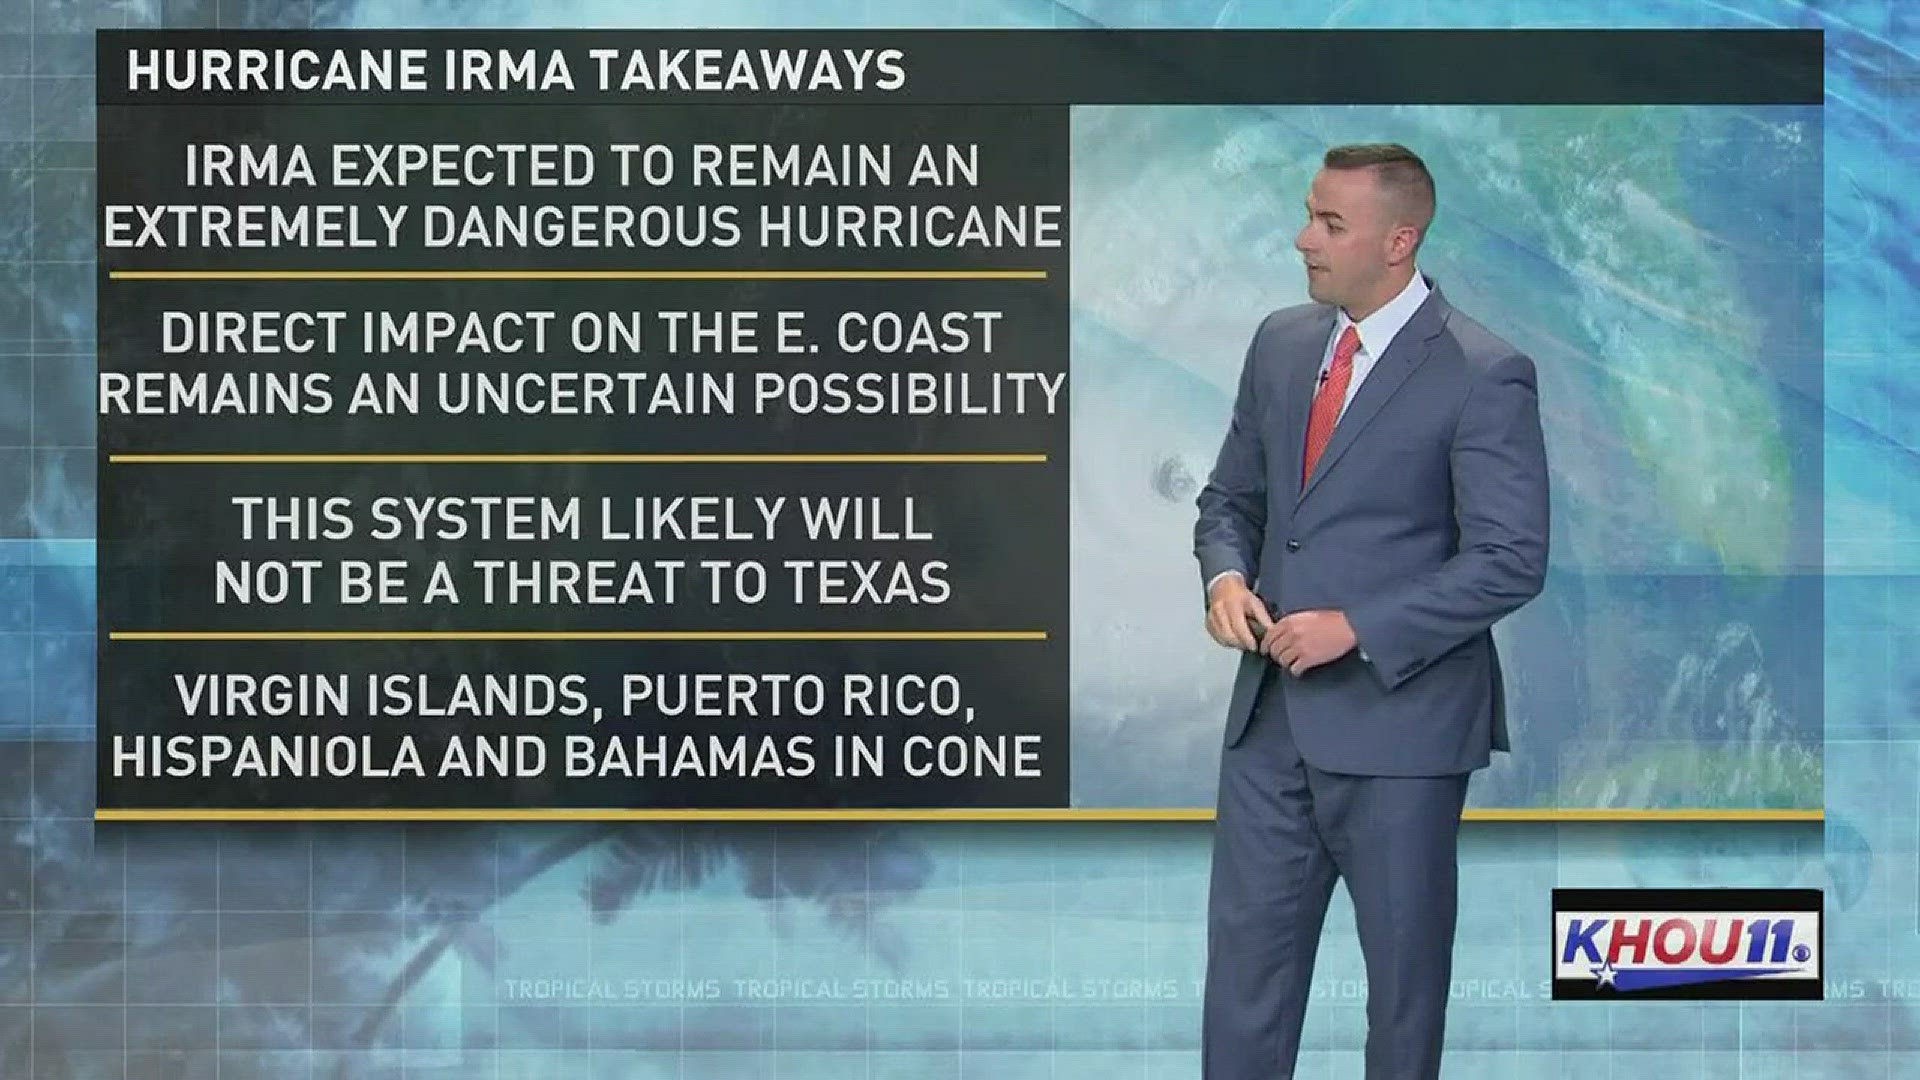 Hurricane Irma is unlikely to hit the Gulf, and a direct impact with the East Coast remains uncertain.